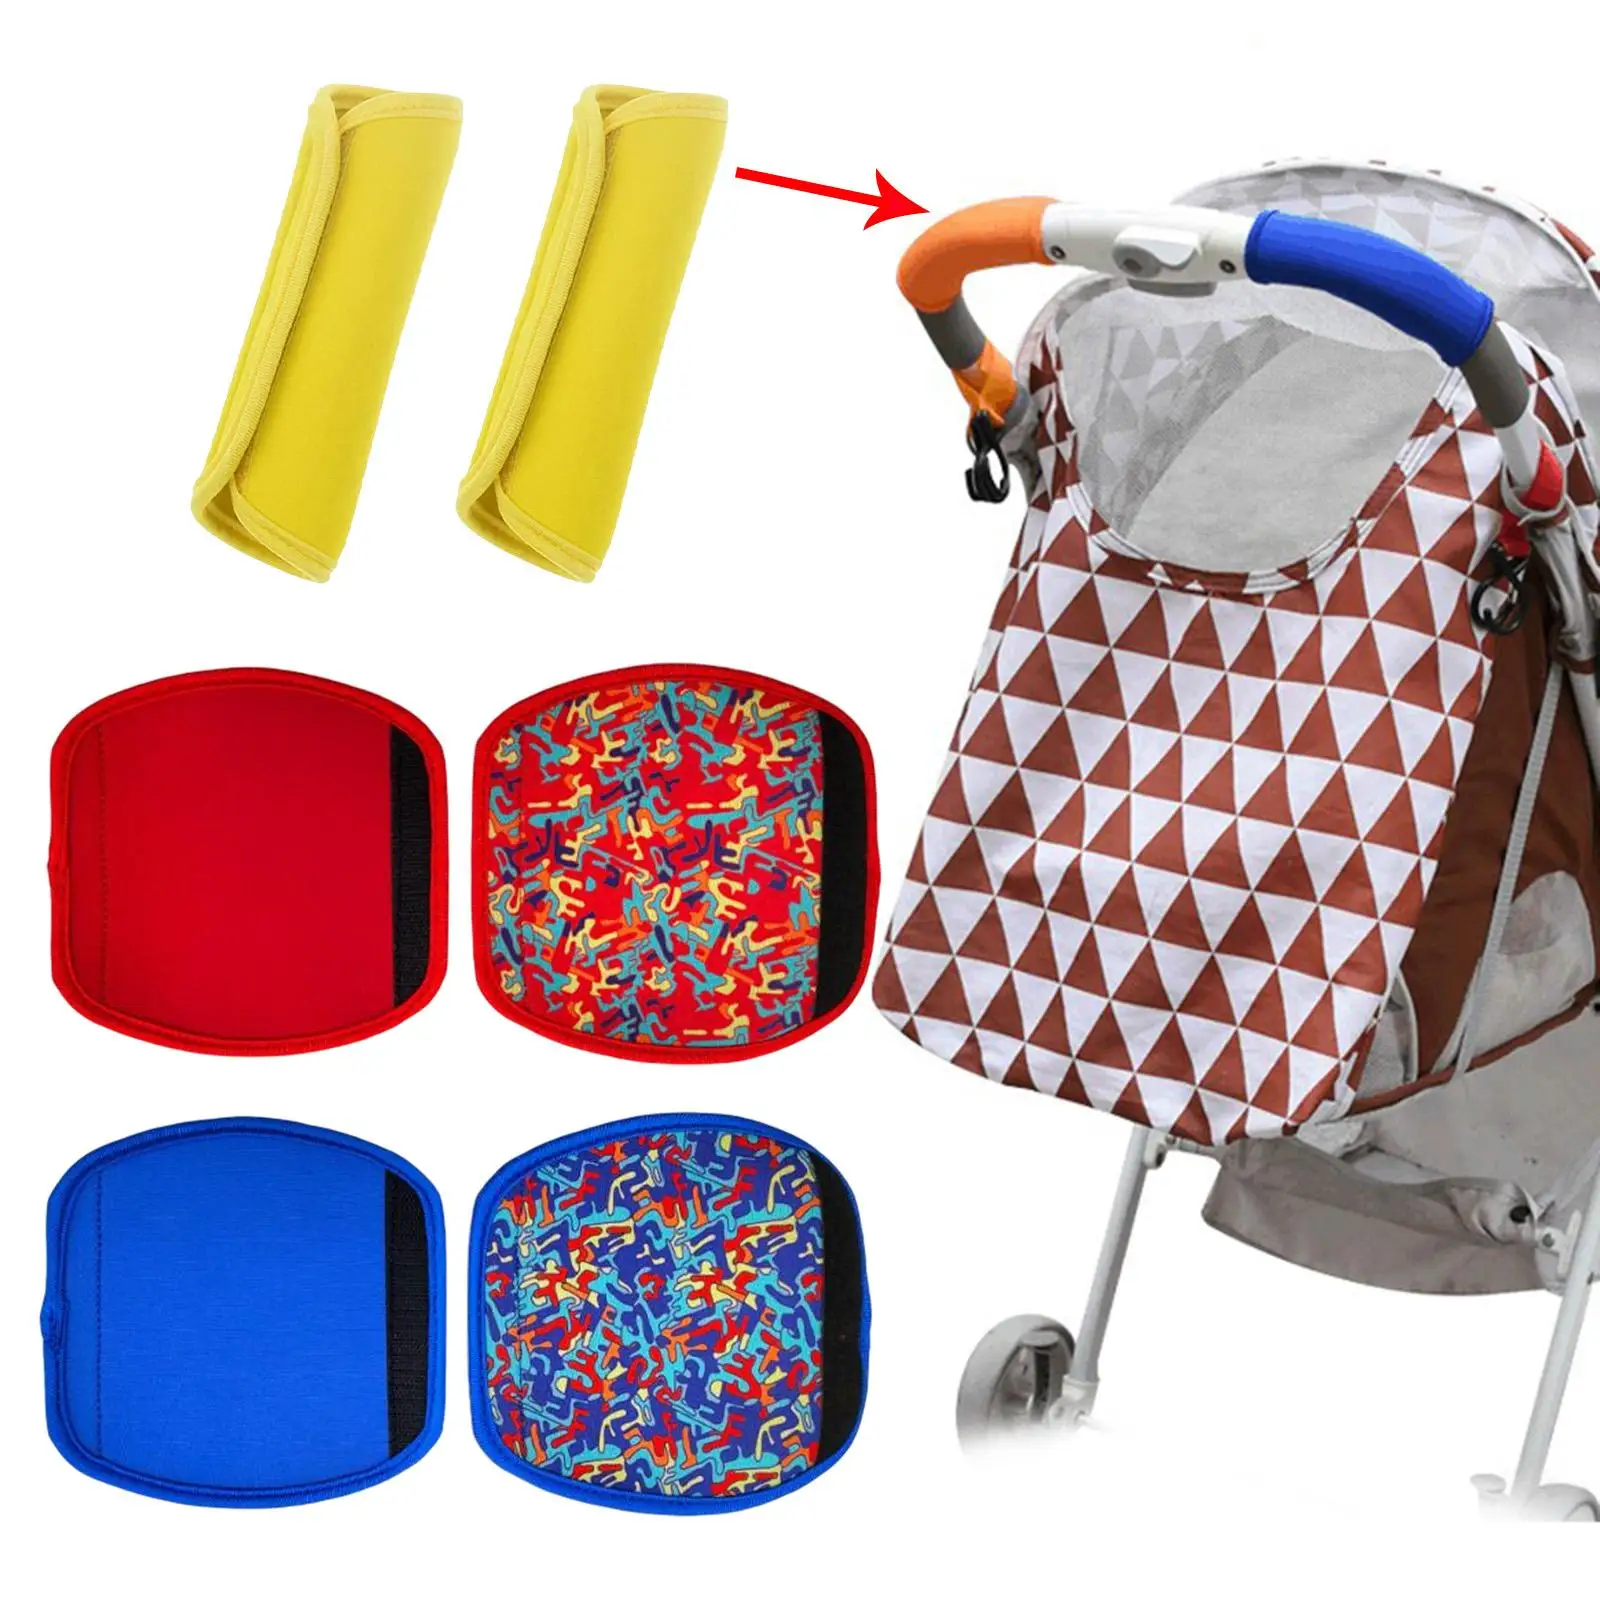 1 Pair Multifunctional Baby Stroller Handle Armrest Covers Dustproof Detachable Protective for Infant Pram Suitcase